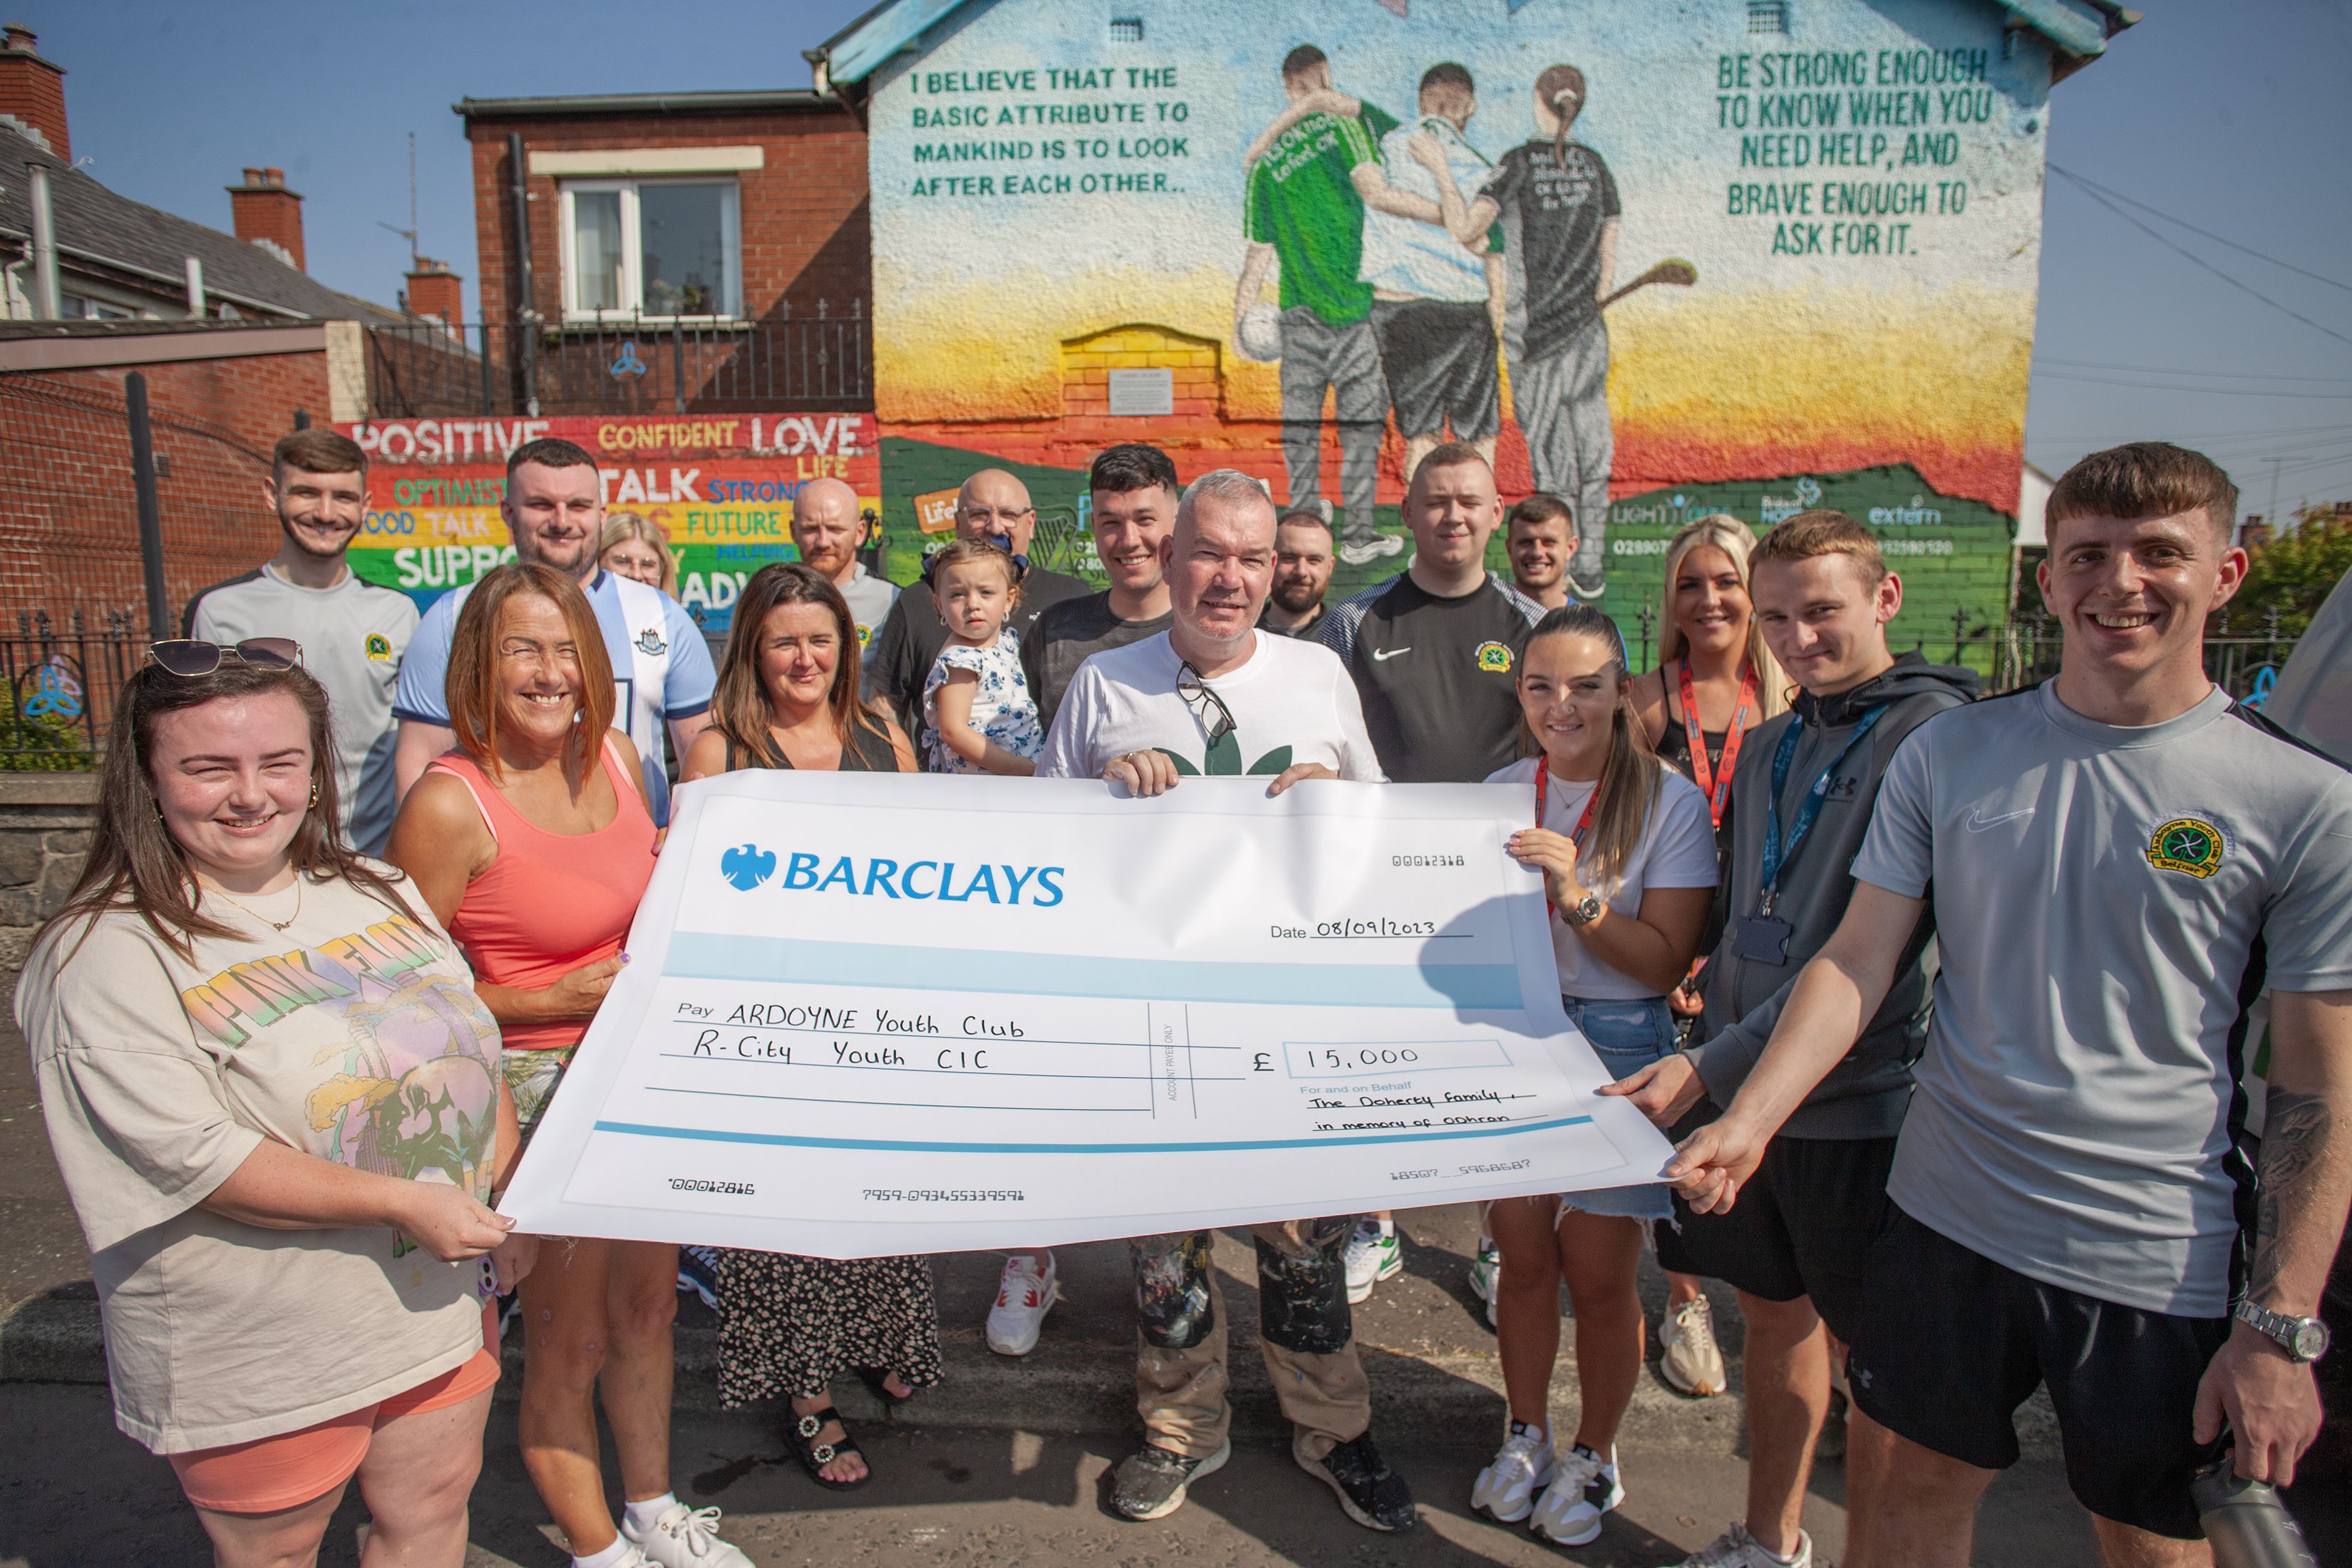 FUNDRAISING: Maureen and Michael Doherty present a cheque to Ardoyne Youth Club and R City for £15,000